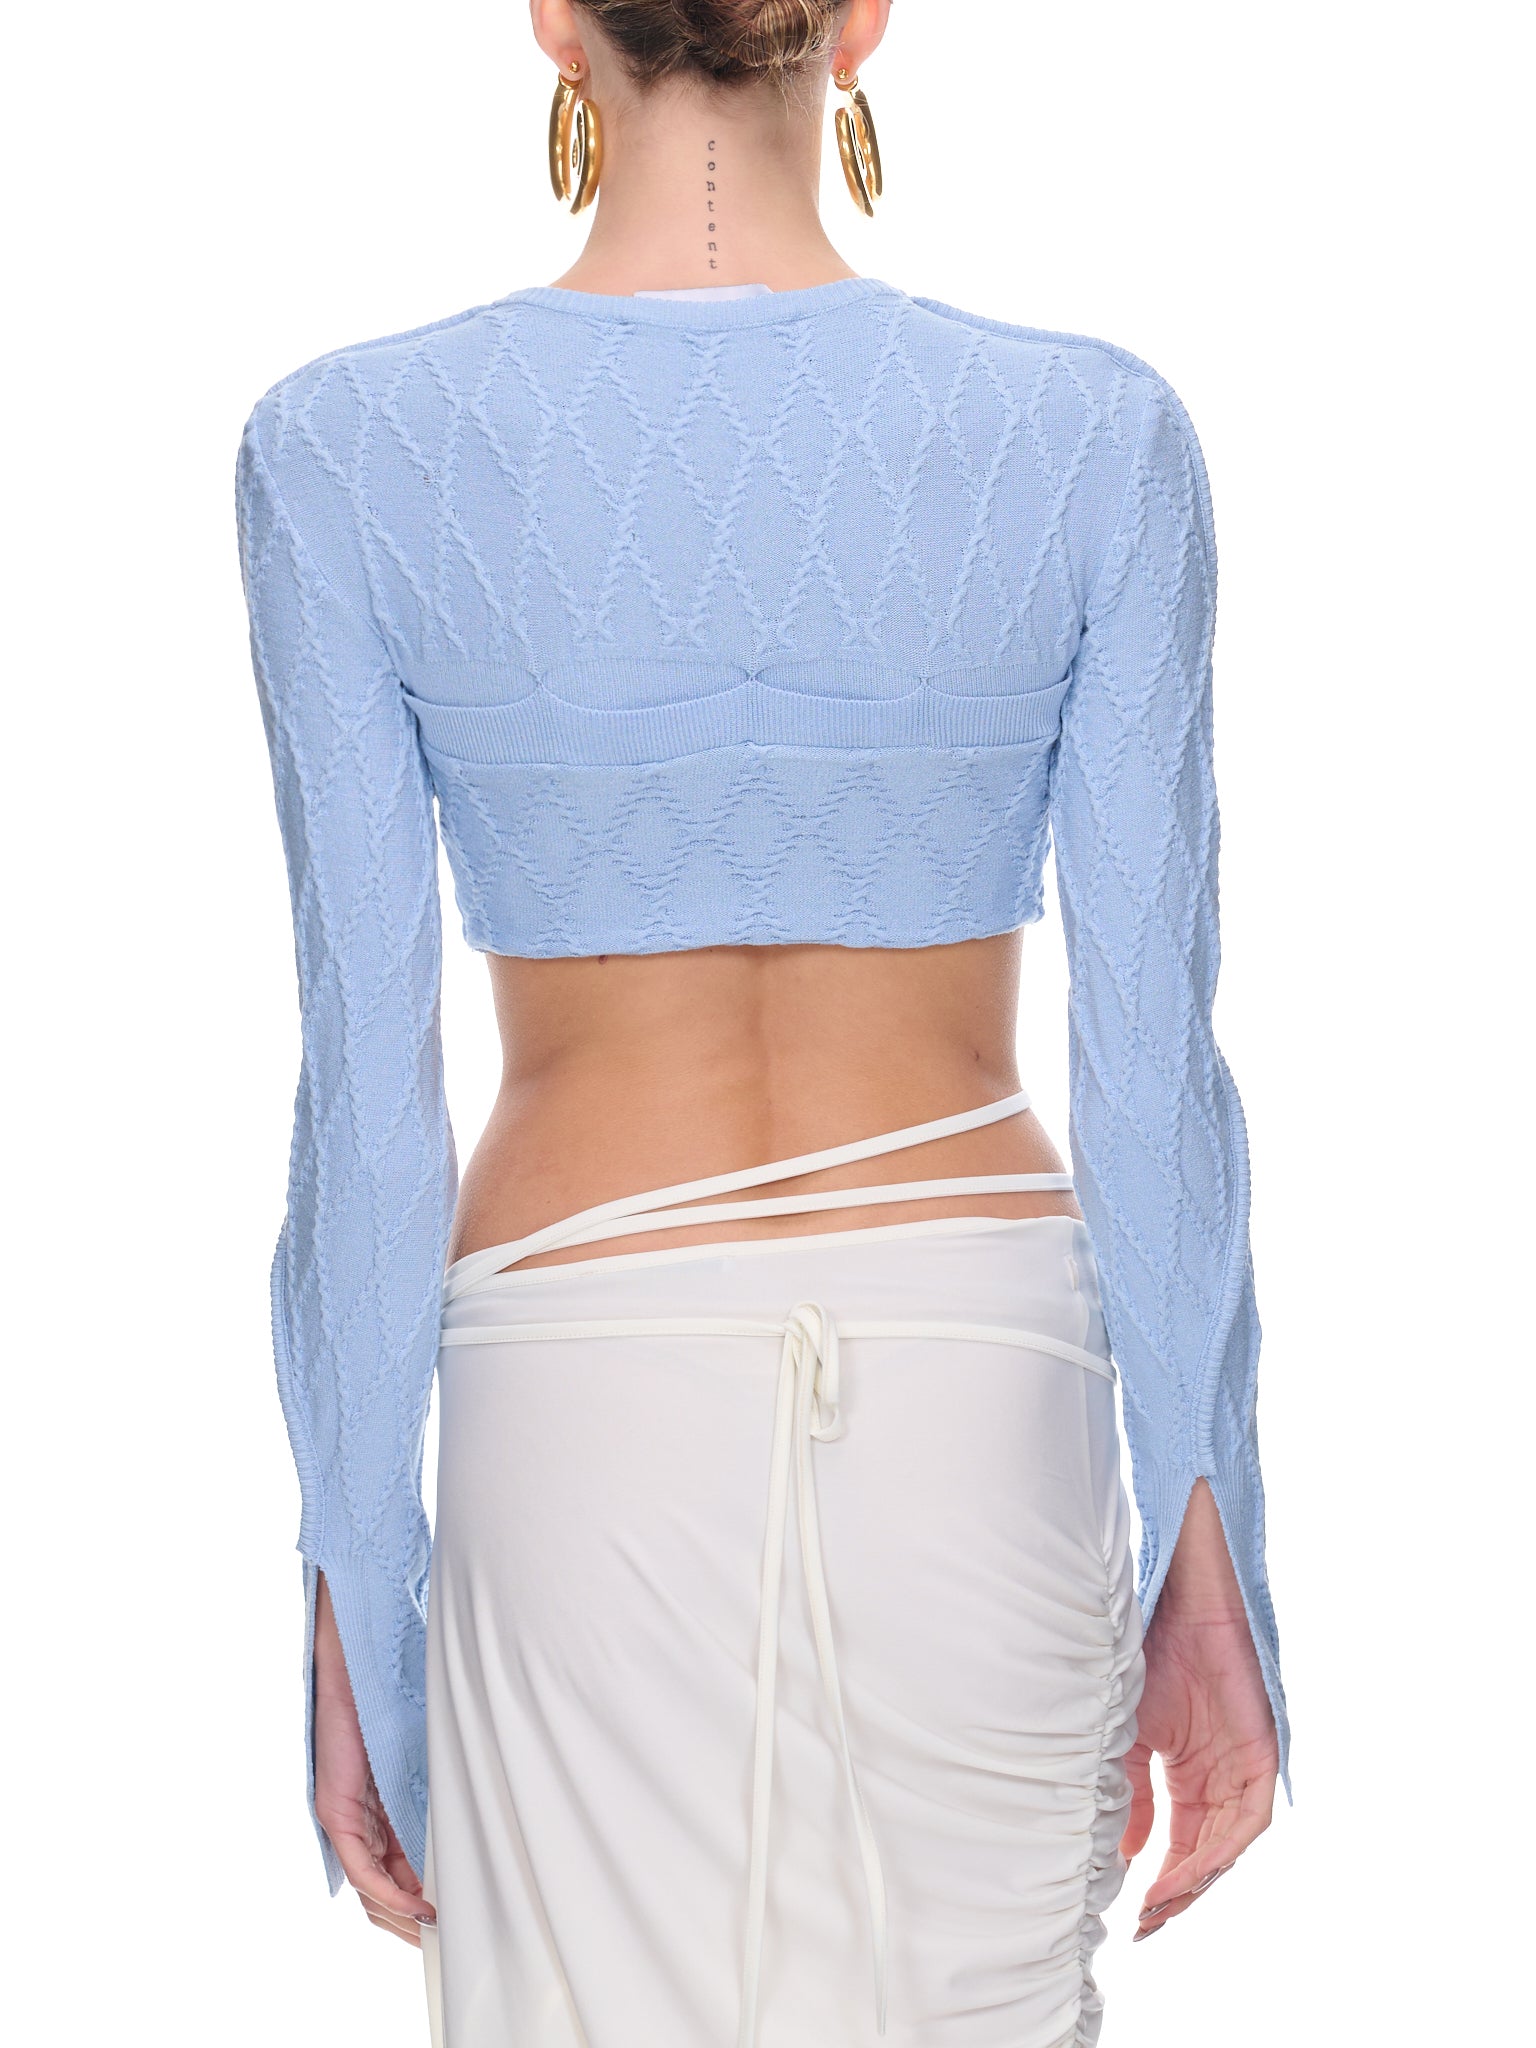 Cable-Knit Crop Sweater (K007-BABY-BLUE)